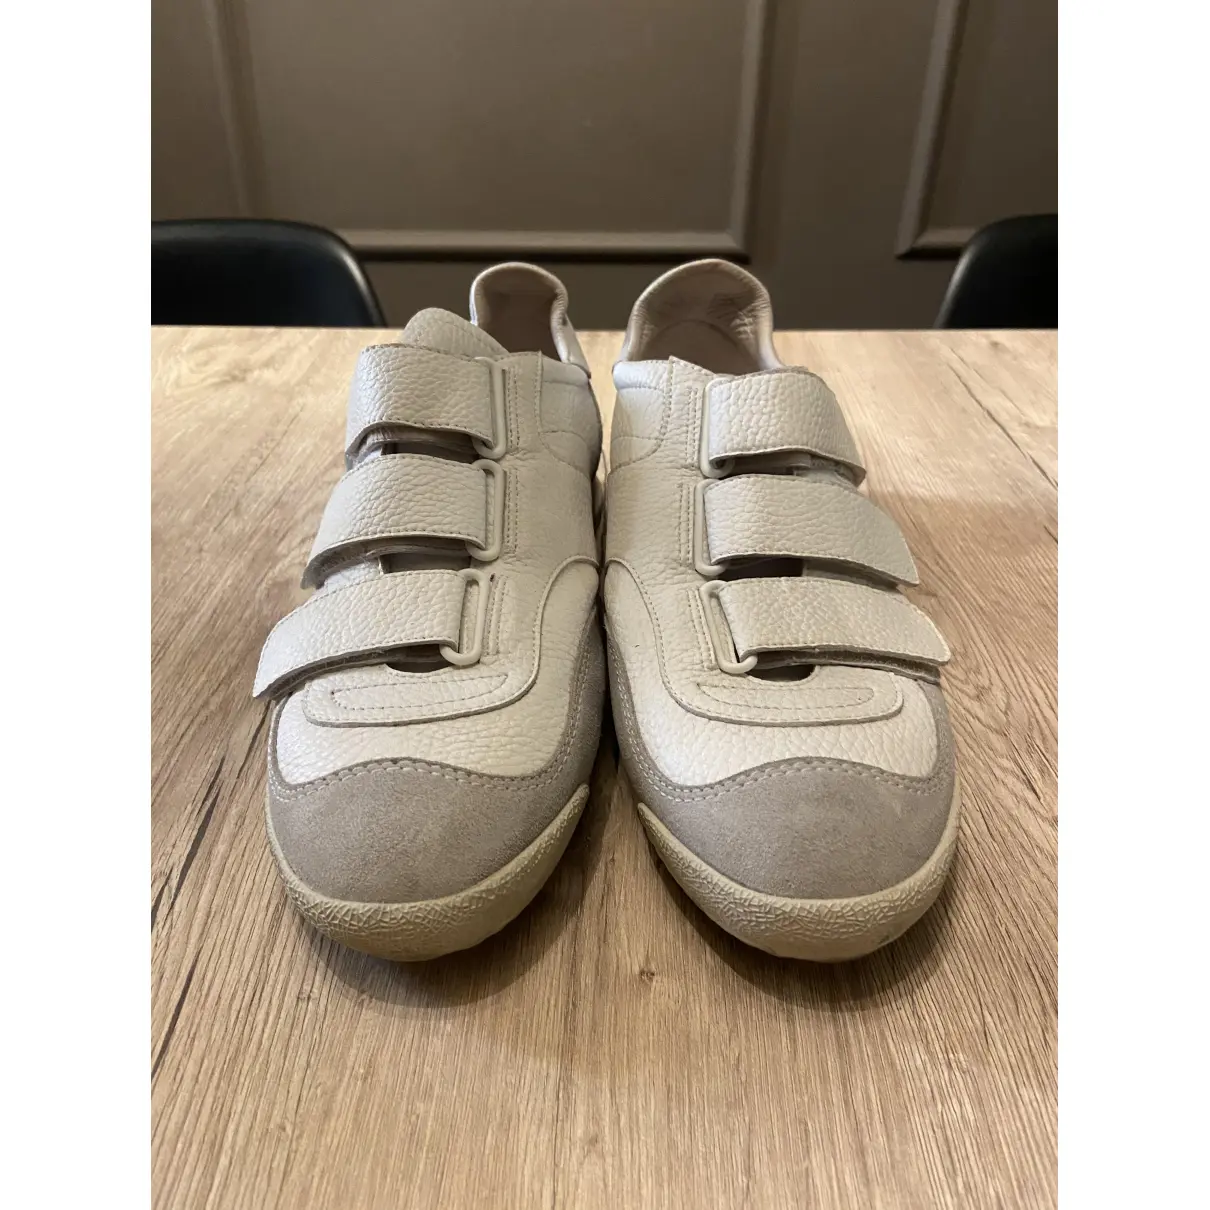 Buy Maison Martin Margiela Replica leather low trainers online